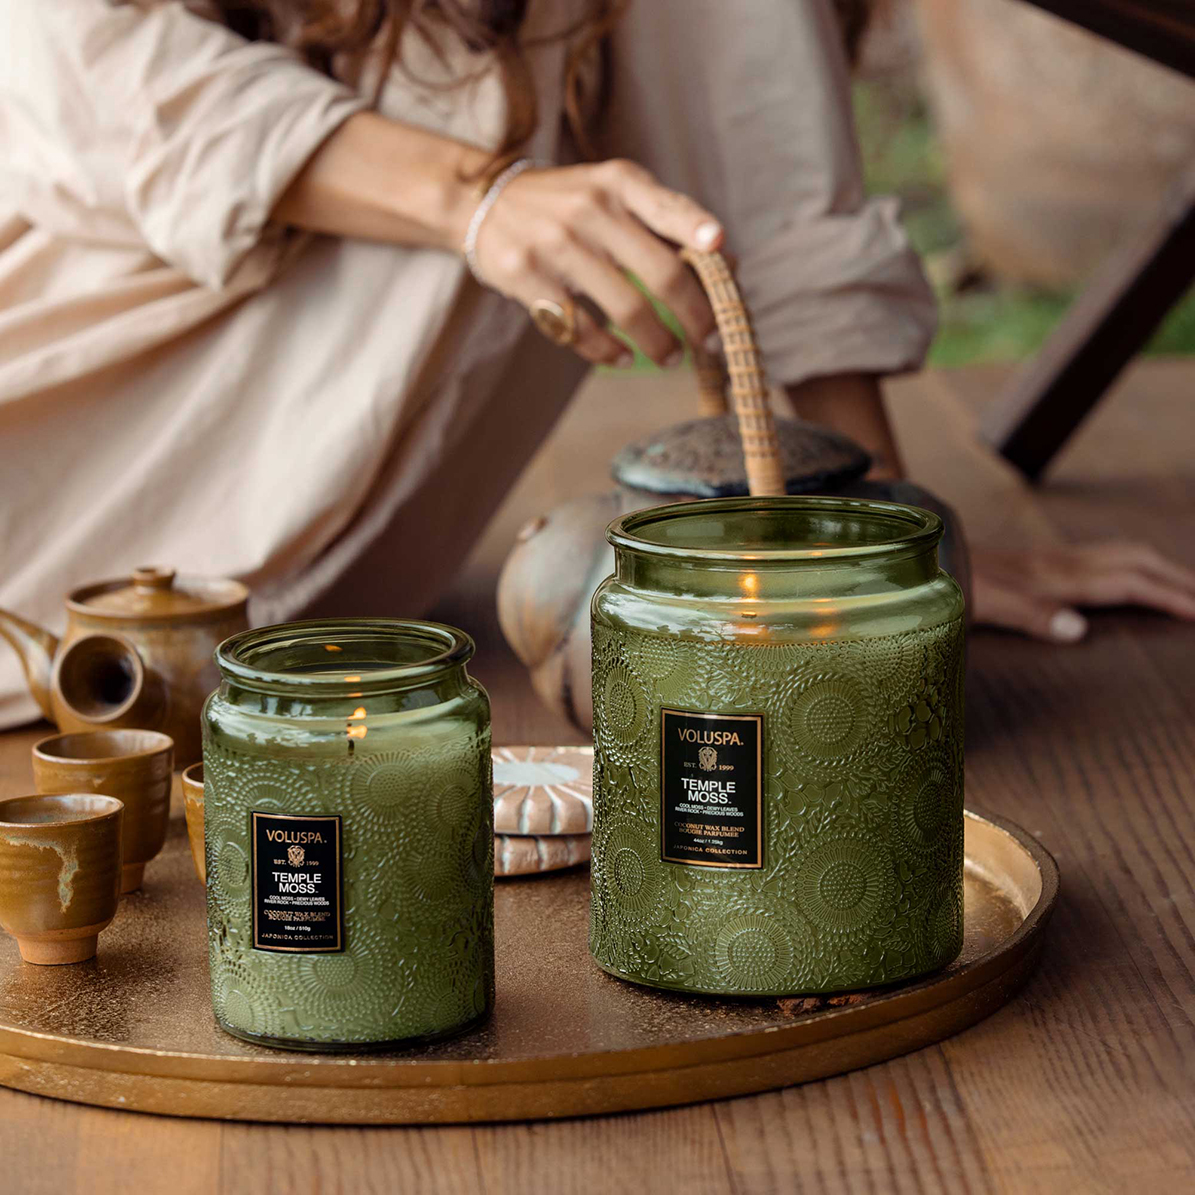 TEMPLE MOSS SCENTED CANDLE IN LARGE JAR 4